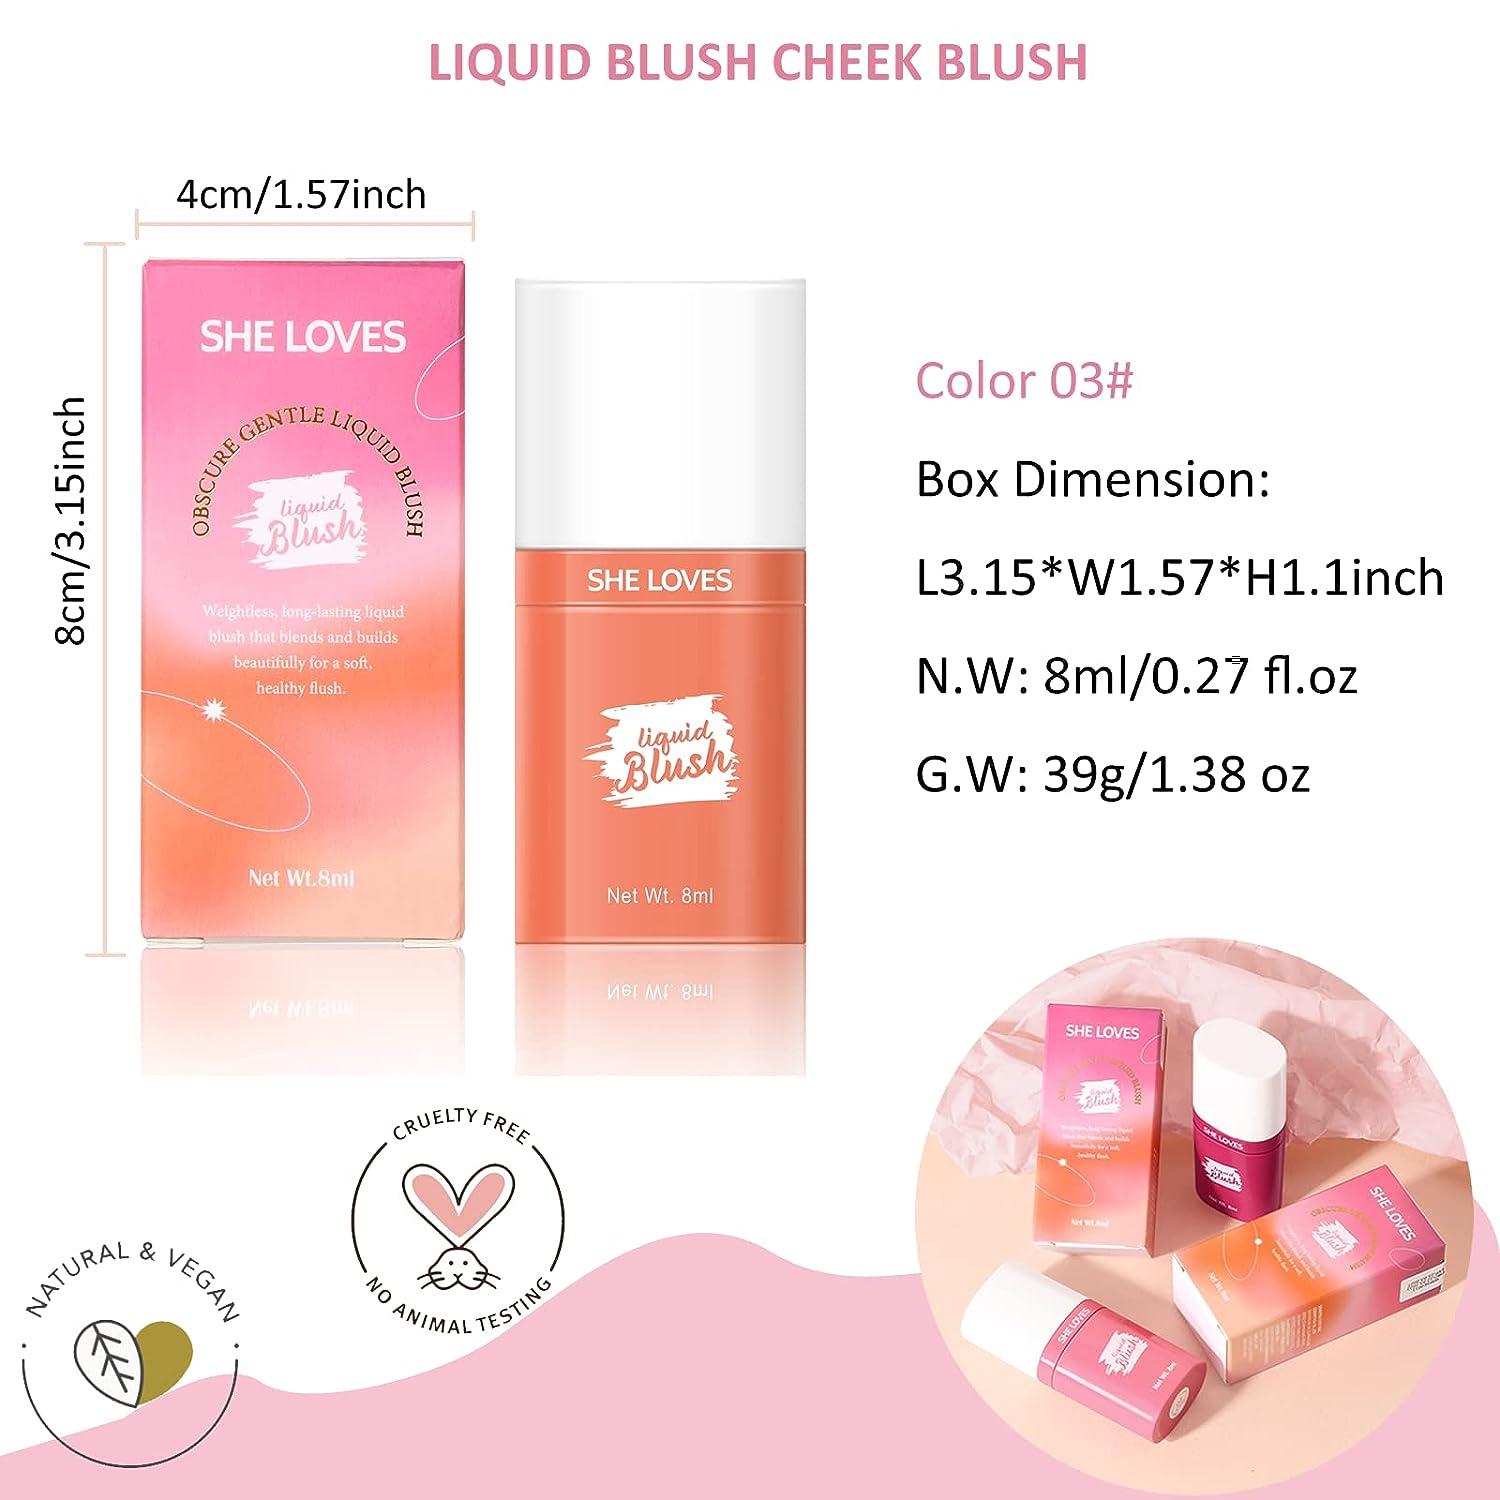 Soft Cream Liquid Blush, Creamy Blush Makeup for Cheek, Dewy Finish,  Buildable Pigment, Lightweight, Long Lasting, For Natural-looking Flush &  Everyday Wear - Inspired (0.22 fl. oz.) 